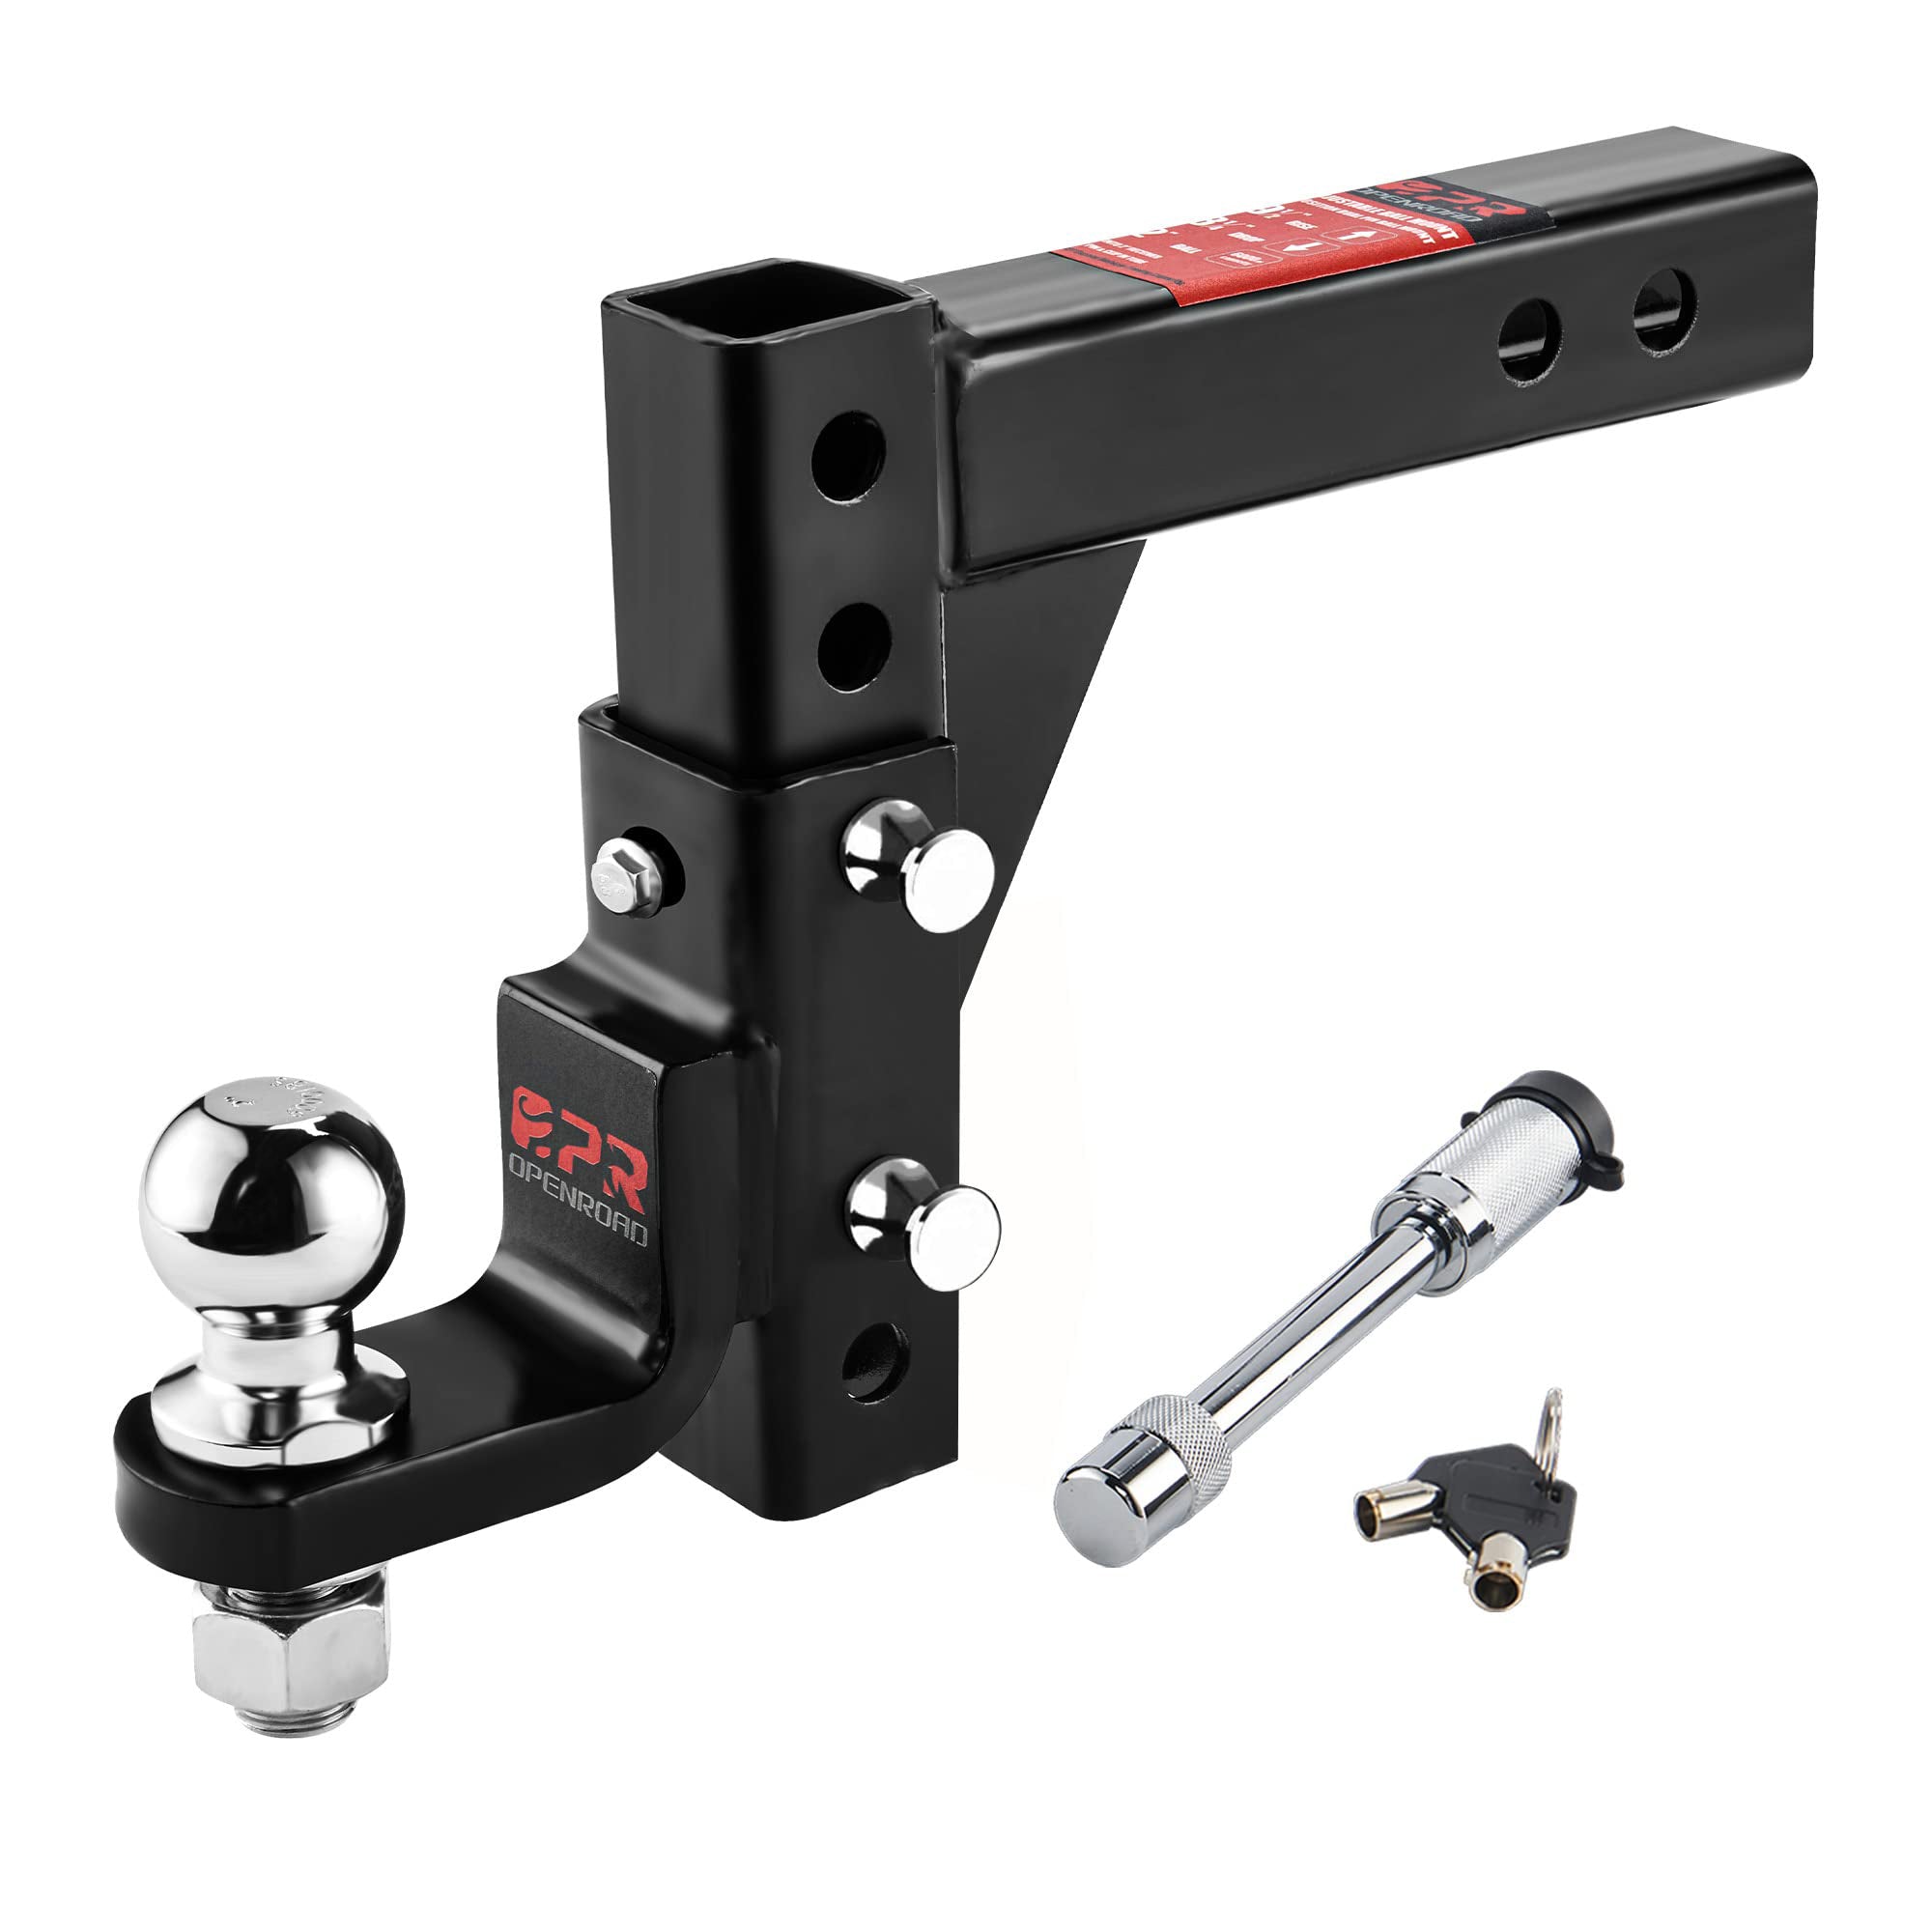 OPENROAD Adjustable Trailer Hitch Ball Mount Fits 2-Inch Receiver, 2" Tow Balls 7500lbs  openroad4wd.com   